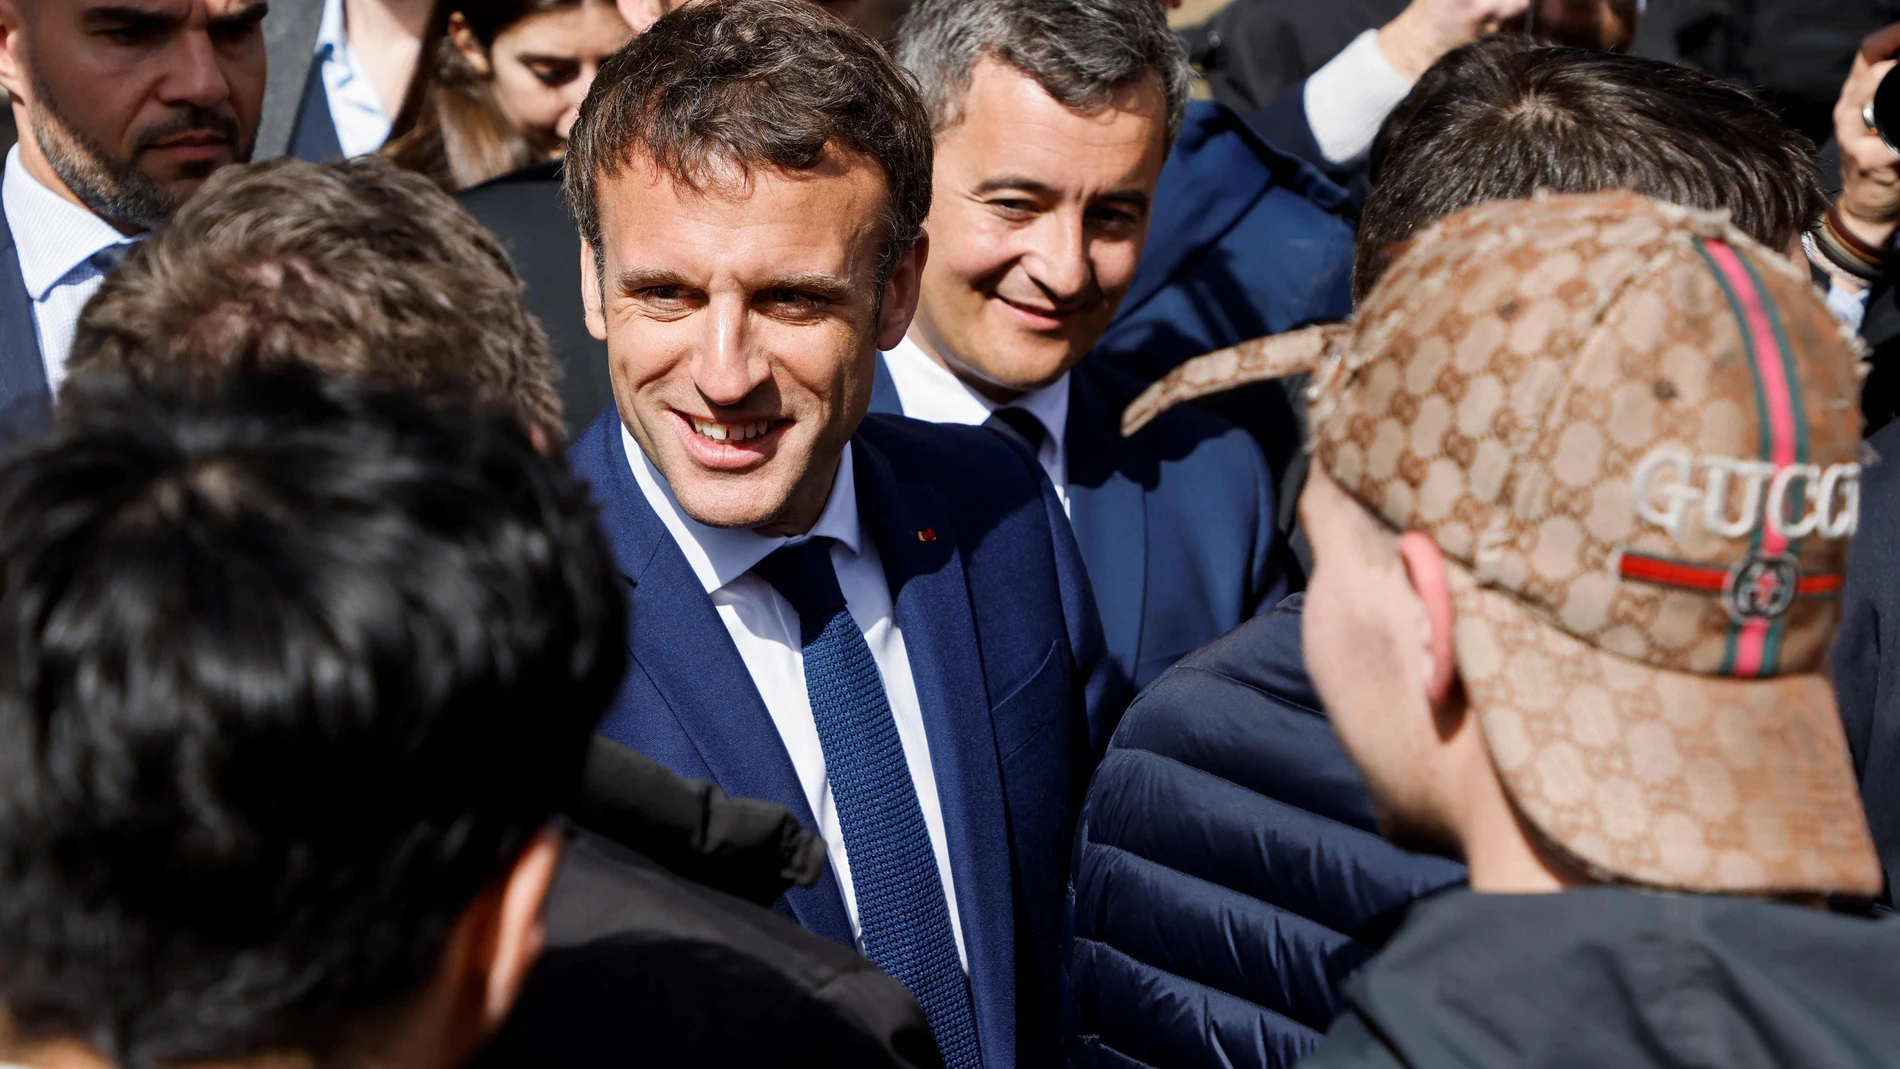 French President, Emmanuel Macron, and Gerald Darmanin (C-R), Interior Minister of France, meet supporters during a visit to the town hall in Denain.